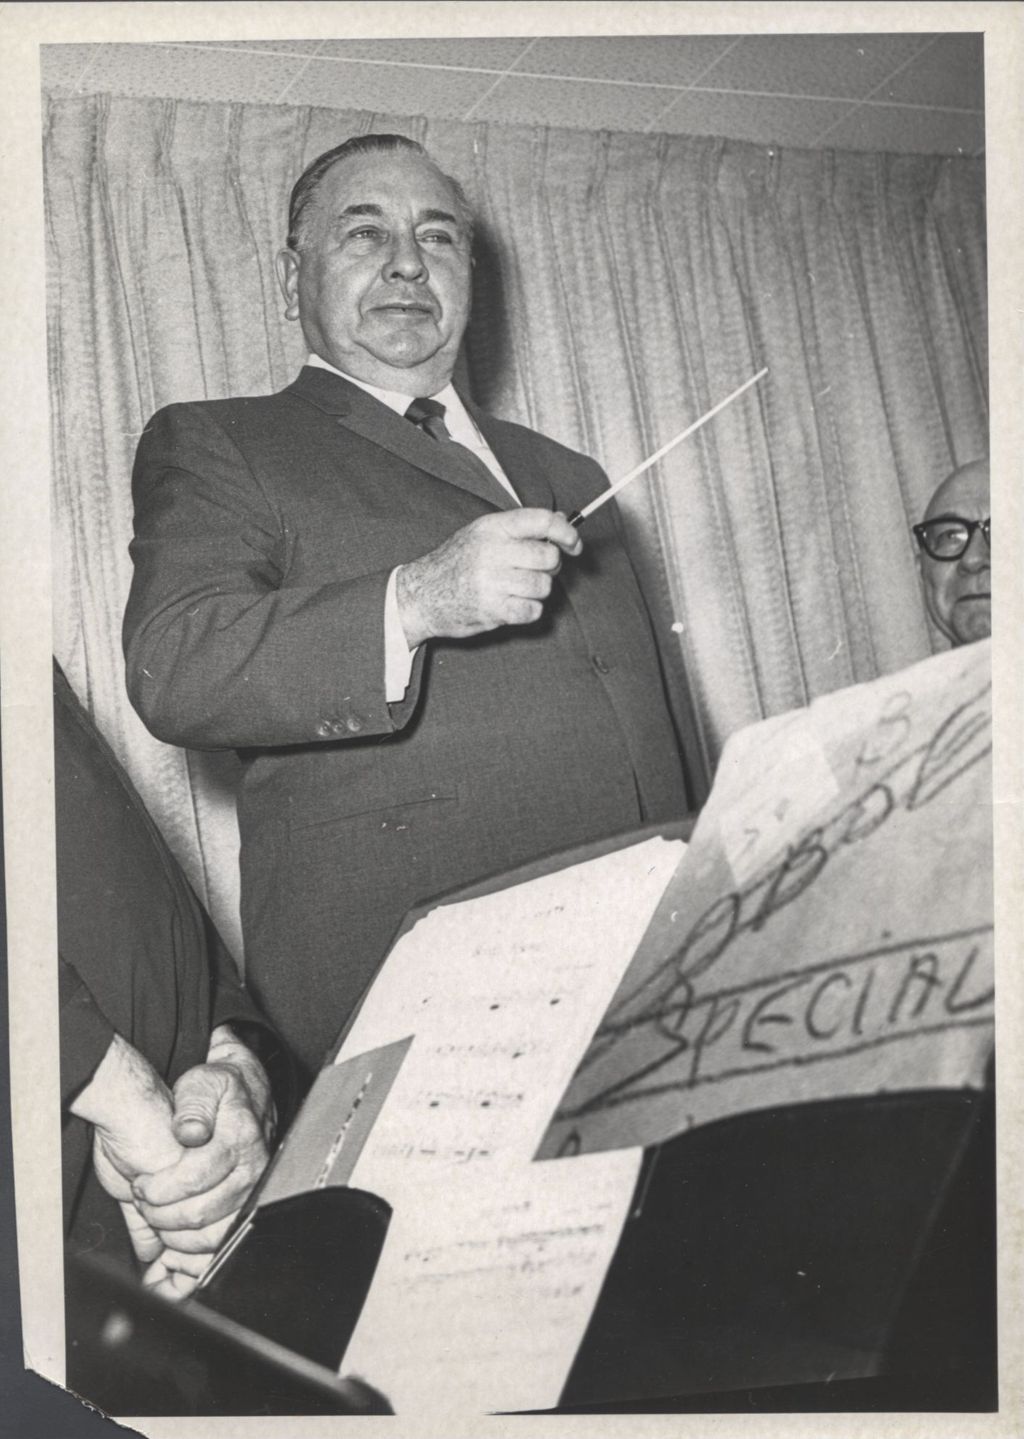 Richard J. Daley with a conductor's baton